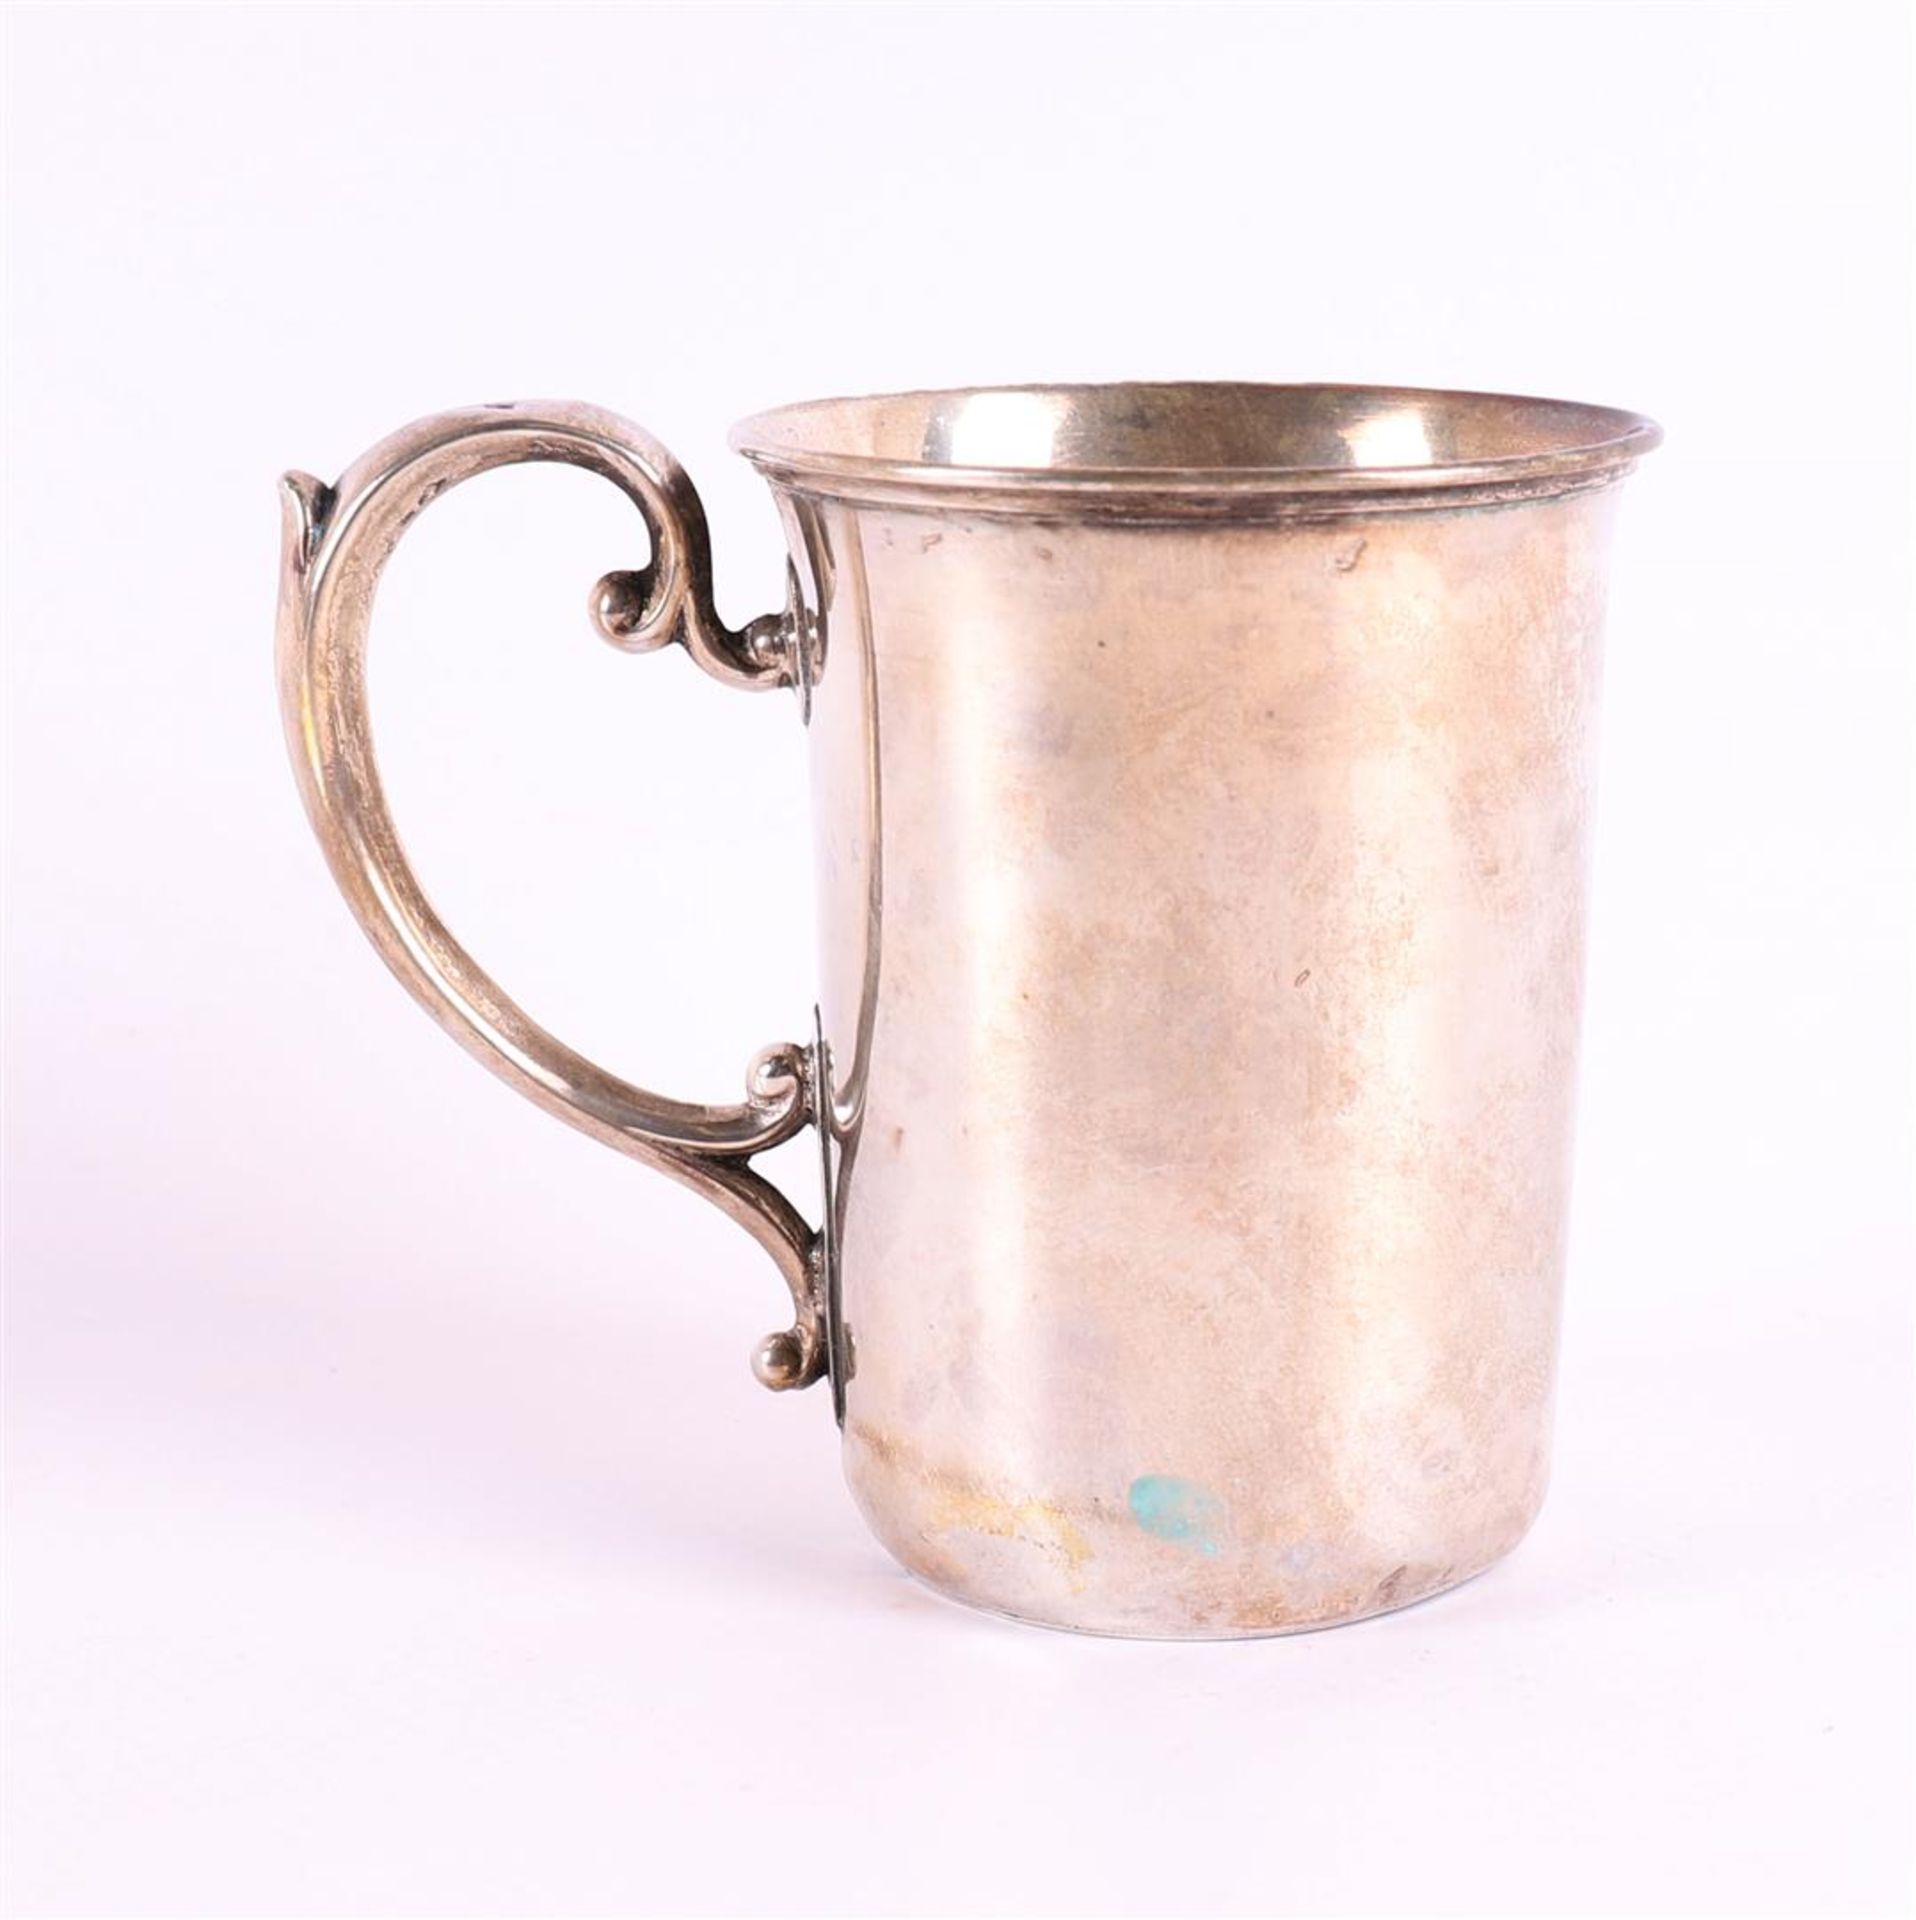 A 3rd grade 800/1000 silver cup on handle, around 1900 (dented), h 7.7 cm, 49 grams. - Image 2 of 5